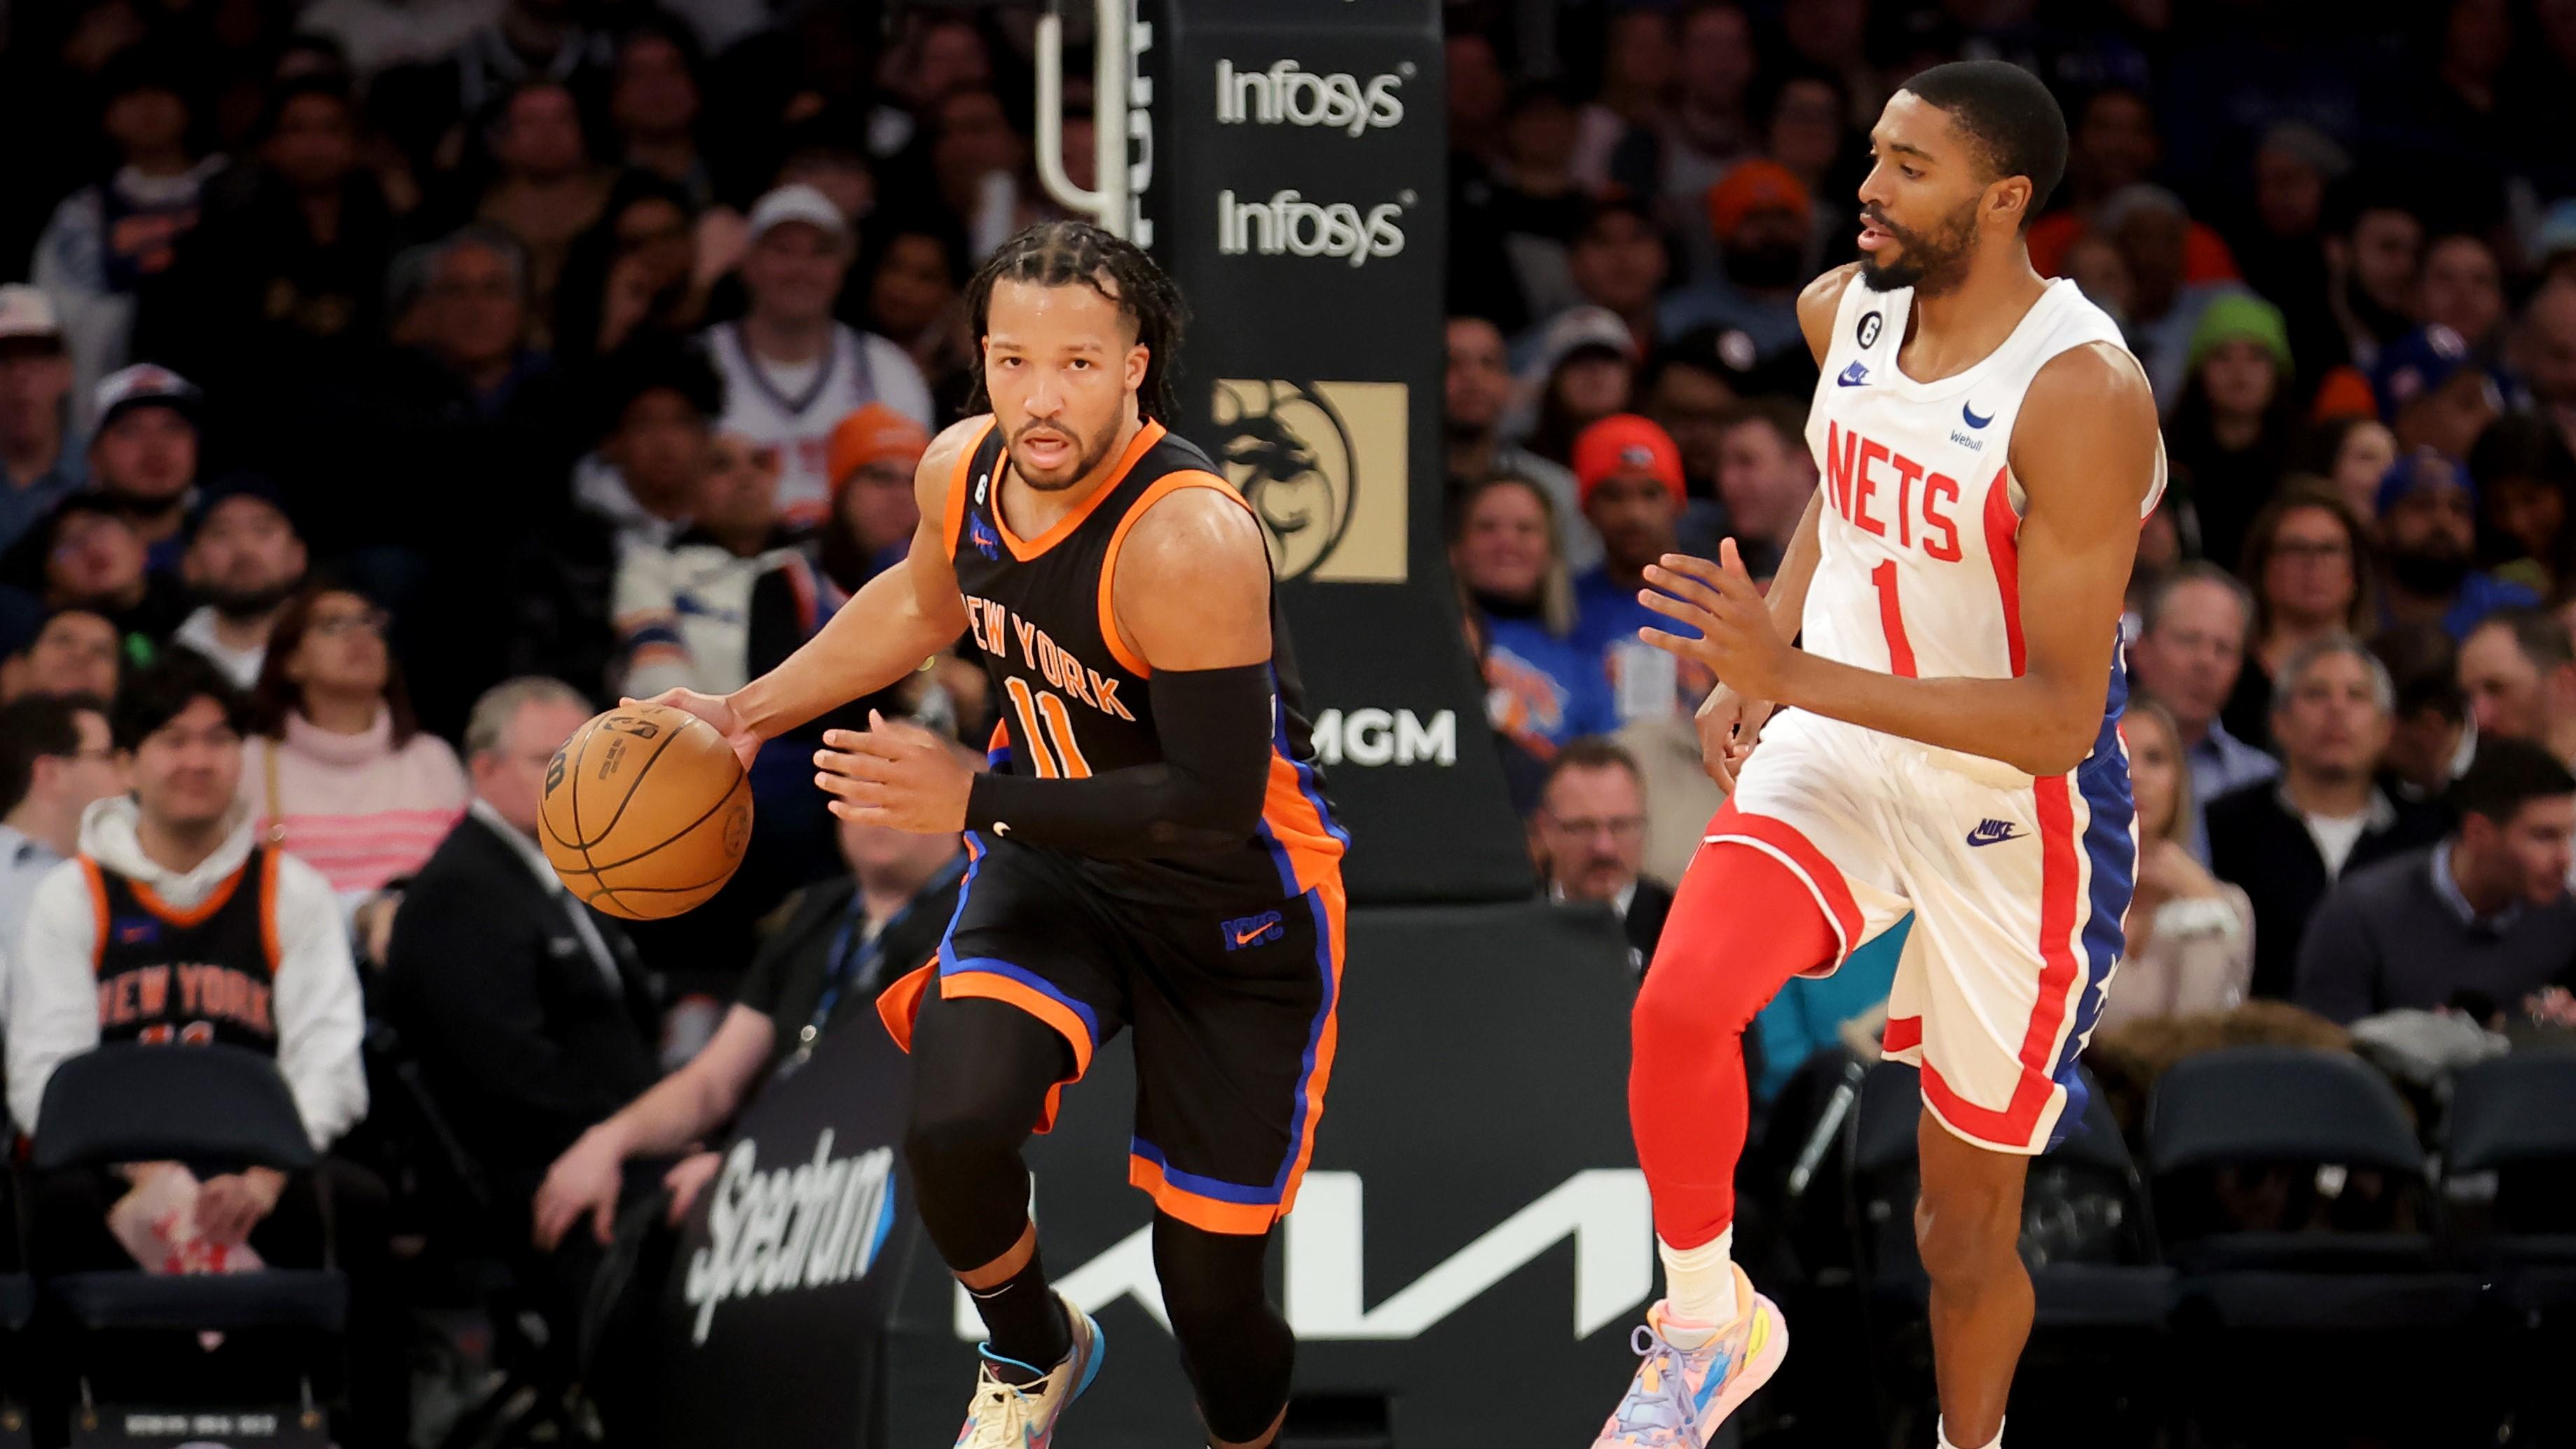 Mar 1, 2023; New York, New York, USA; New York Knicks guard Jalen Brunson (11) brings the ball up court against Brooklyn Nets forward Mikal Bridges (1) during the third quarter at Madison Square Garden. Mandatory Credit: Brad Penner-USA TODAY Sports / © Brad Penner-USA TODAY Sports